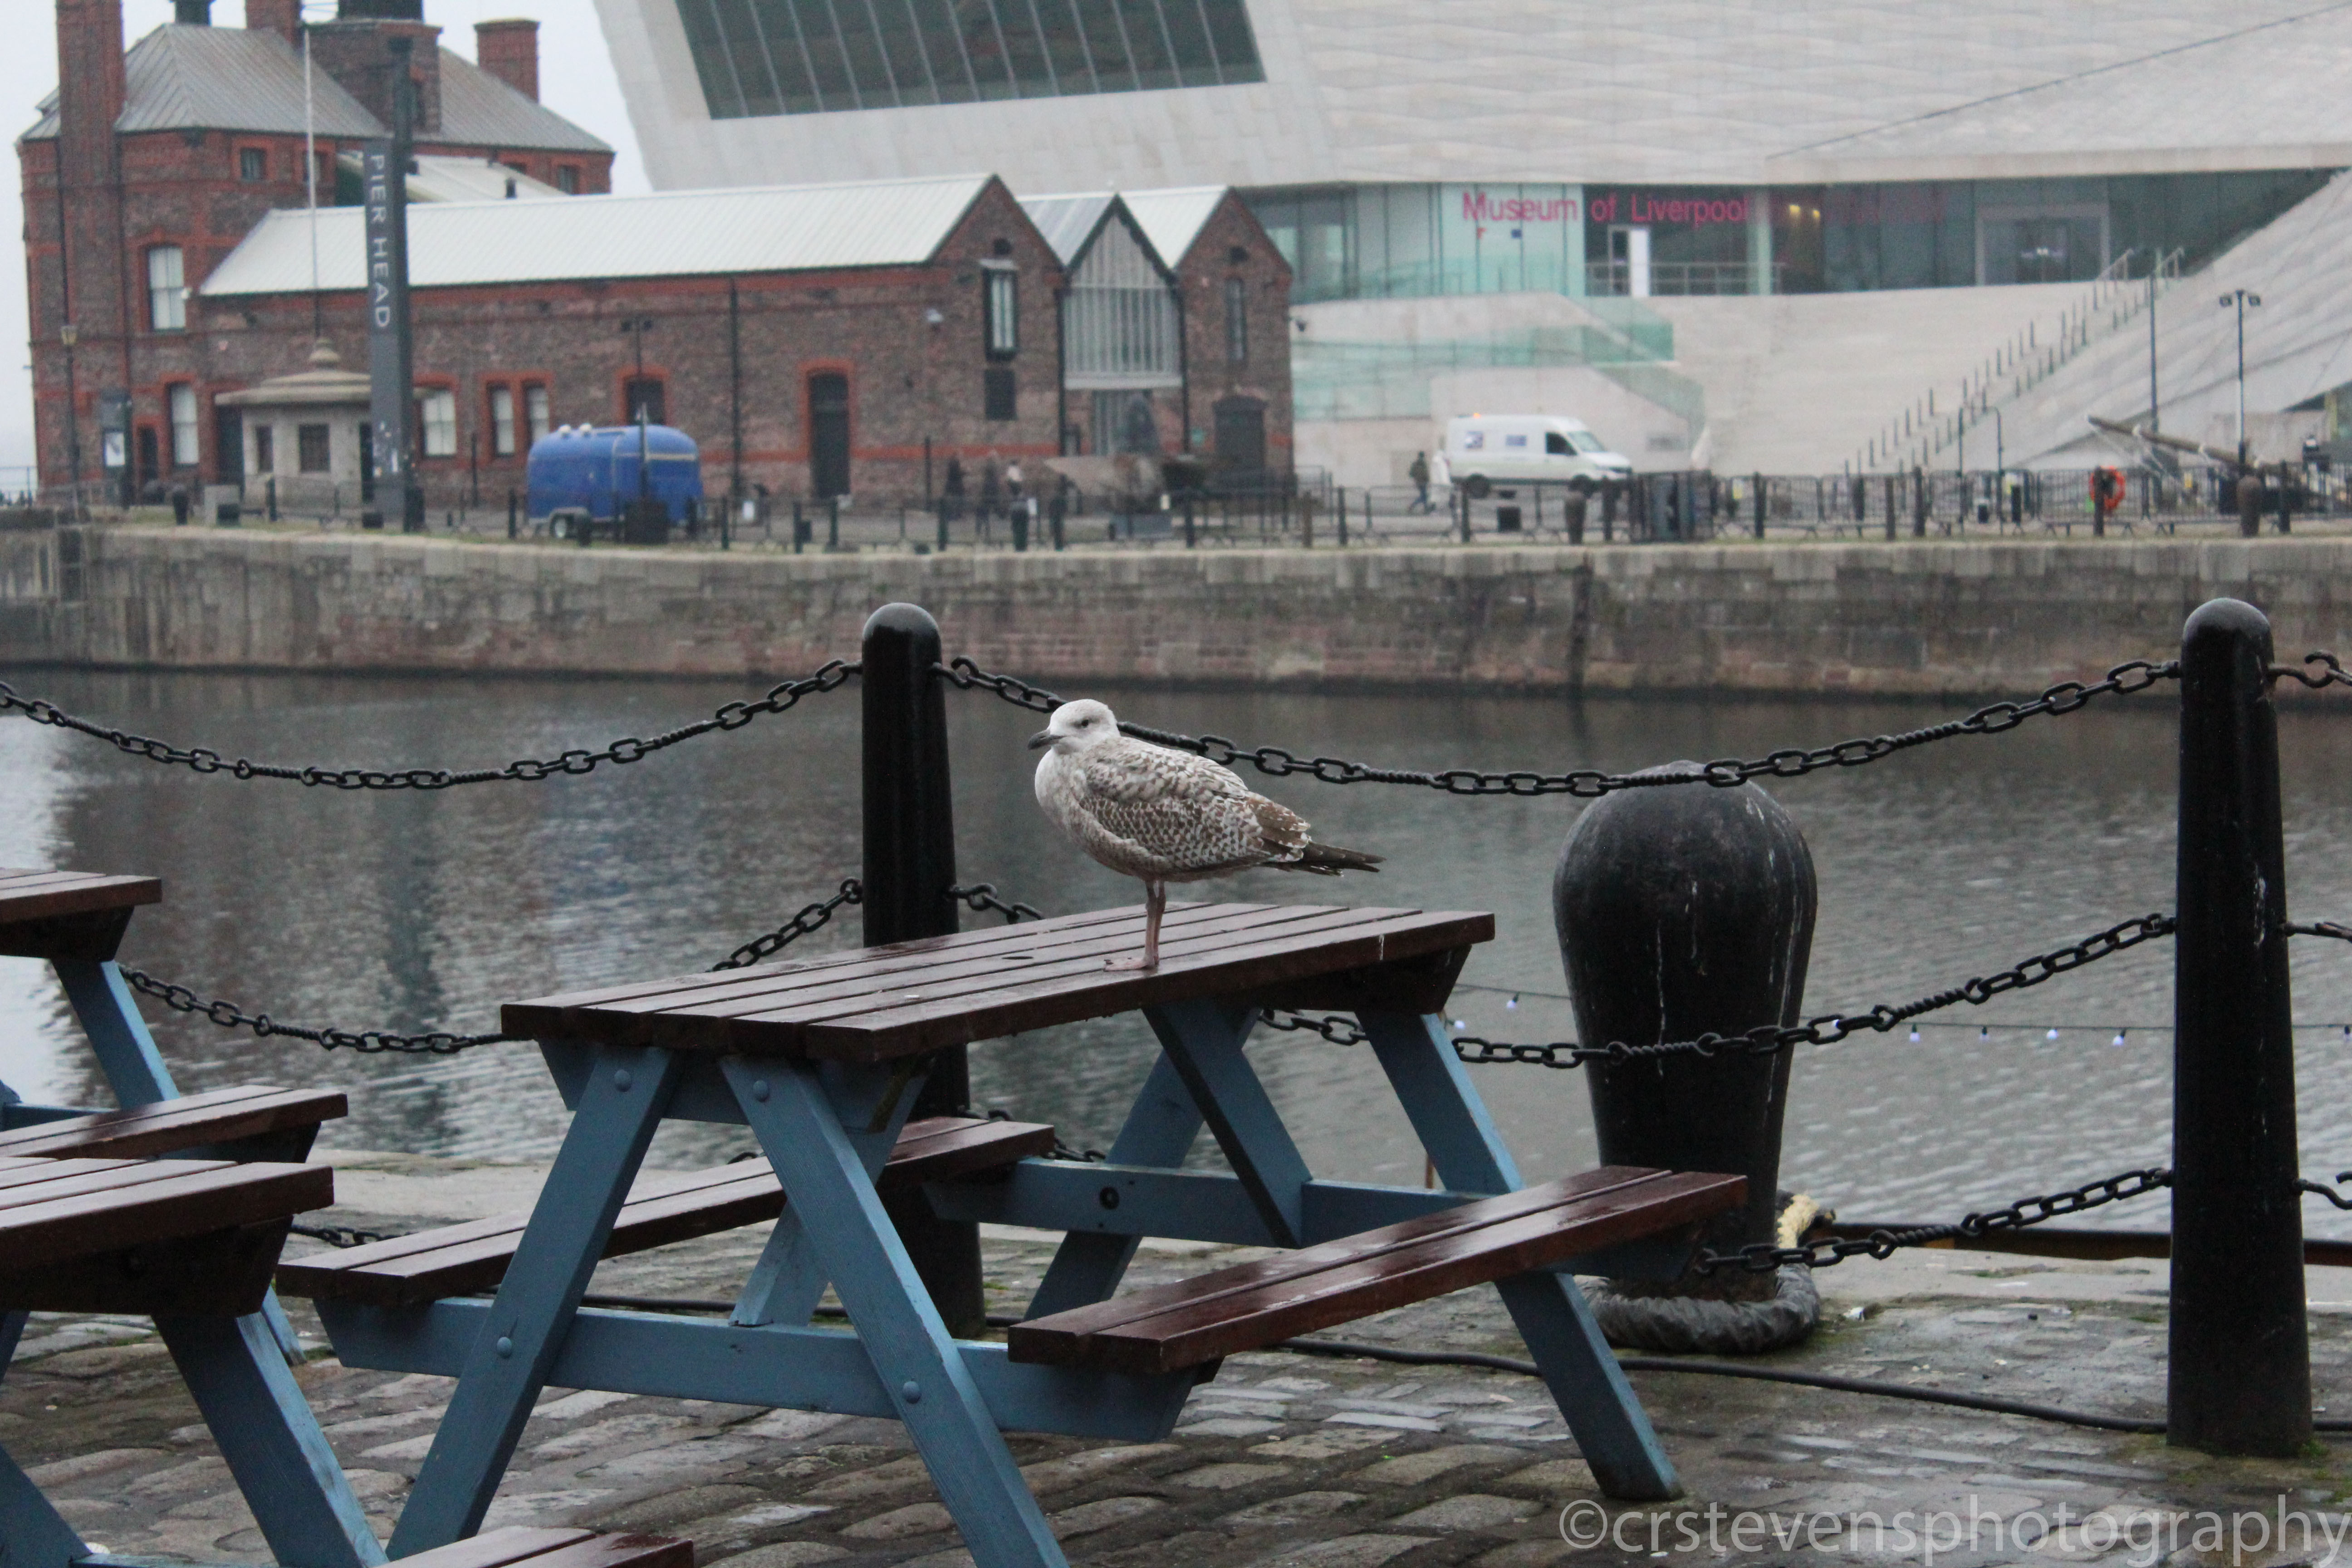 a seagull on a picnic bench next to a fence and a canal